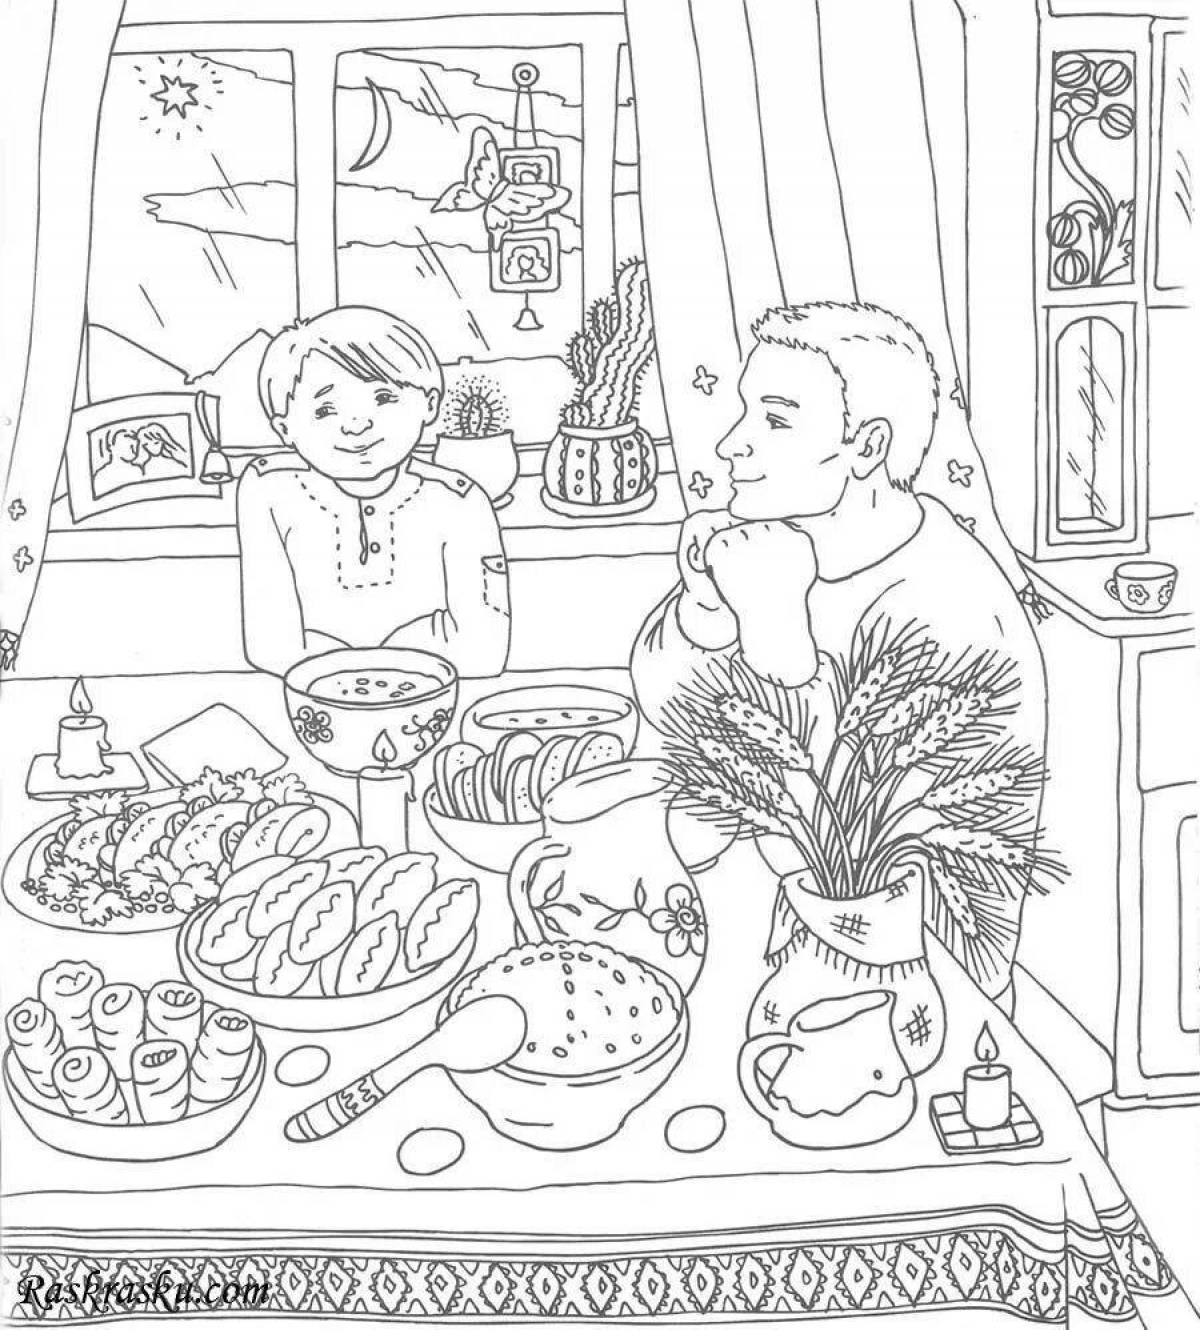 Coloring page cute family at the table